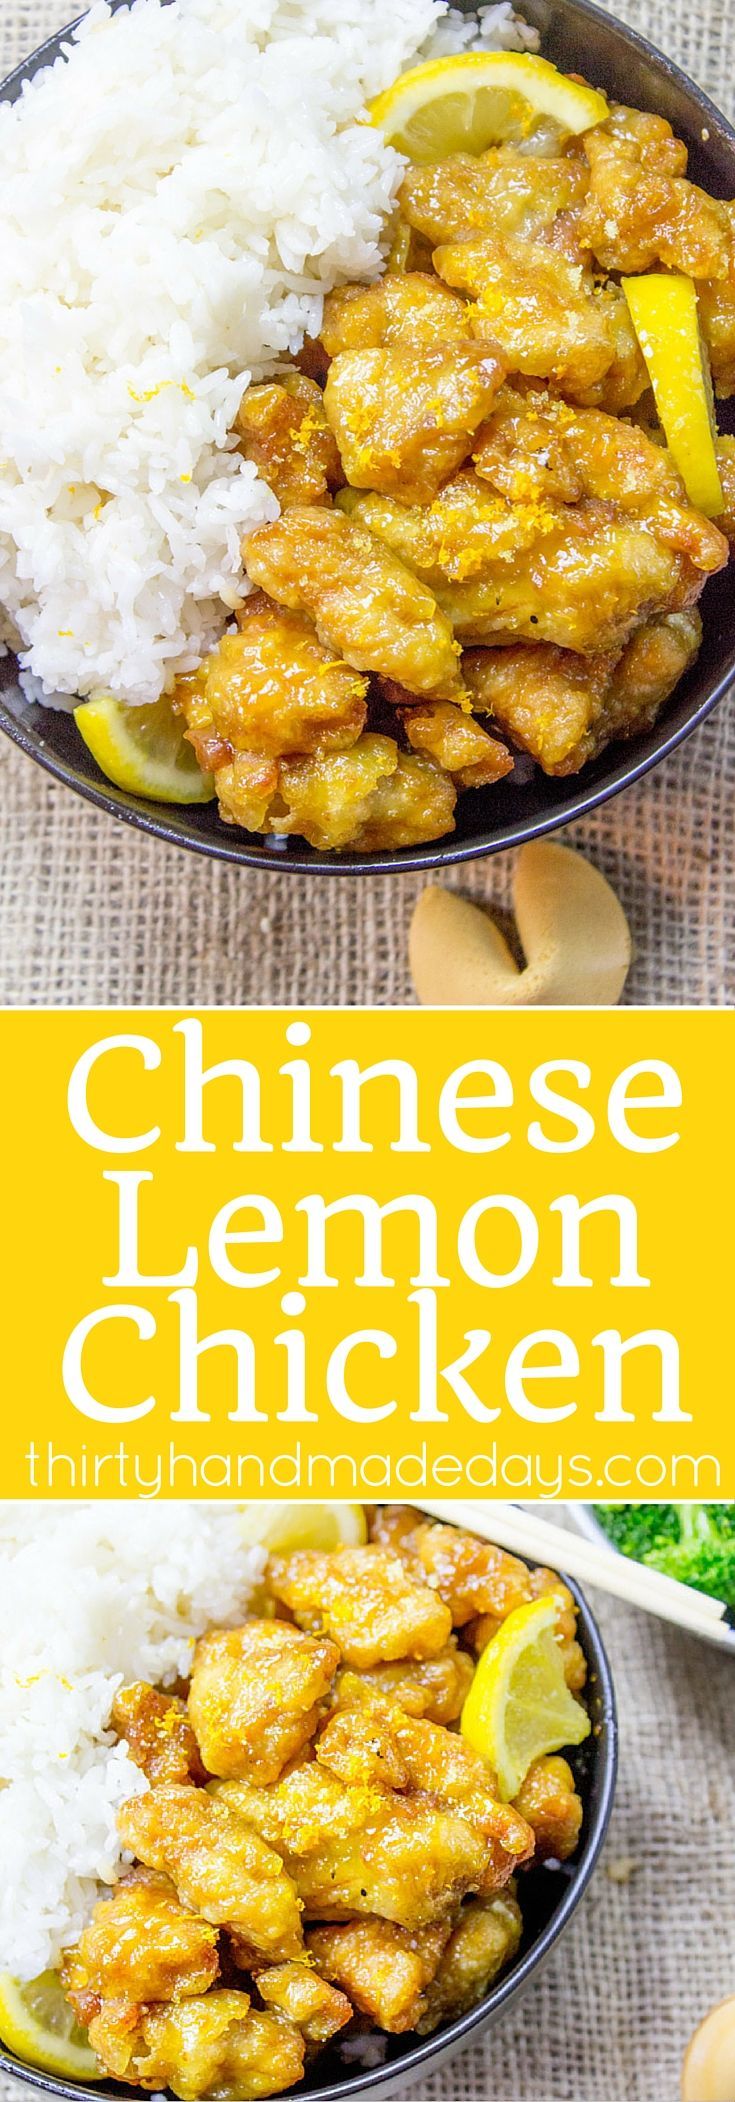 Classic Lemon Chicken with crispy battered chicken thighs in a sweet and tangy sauce. You can skip the delivery and the wait and